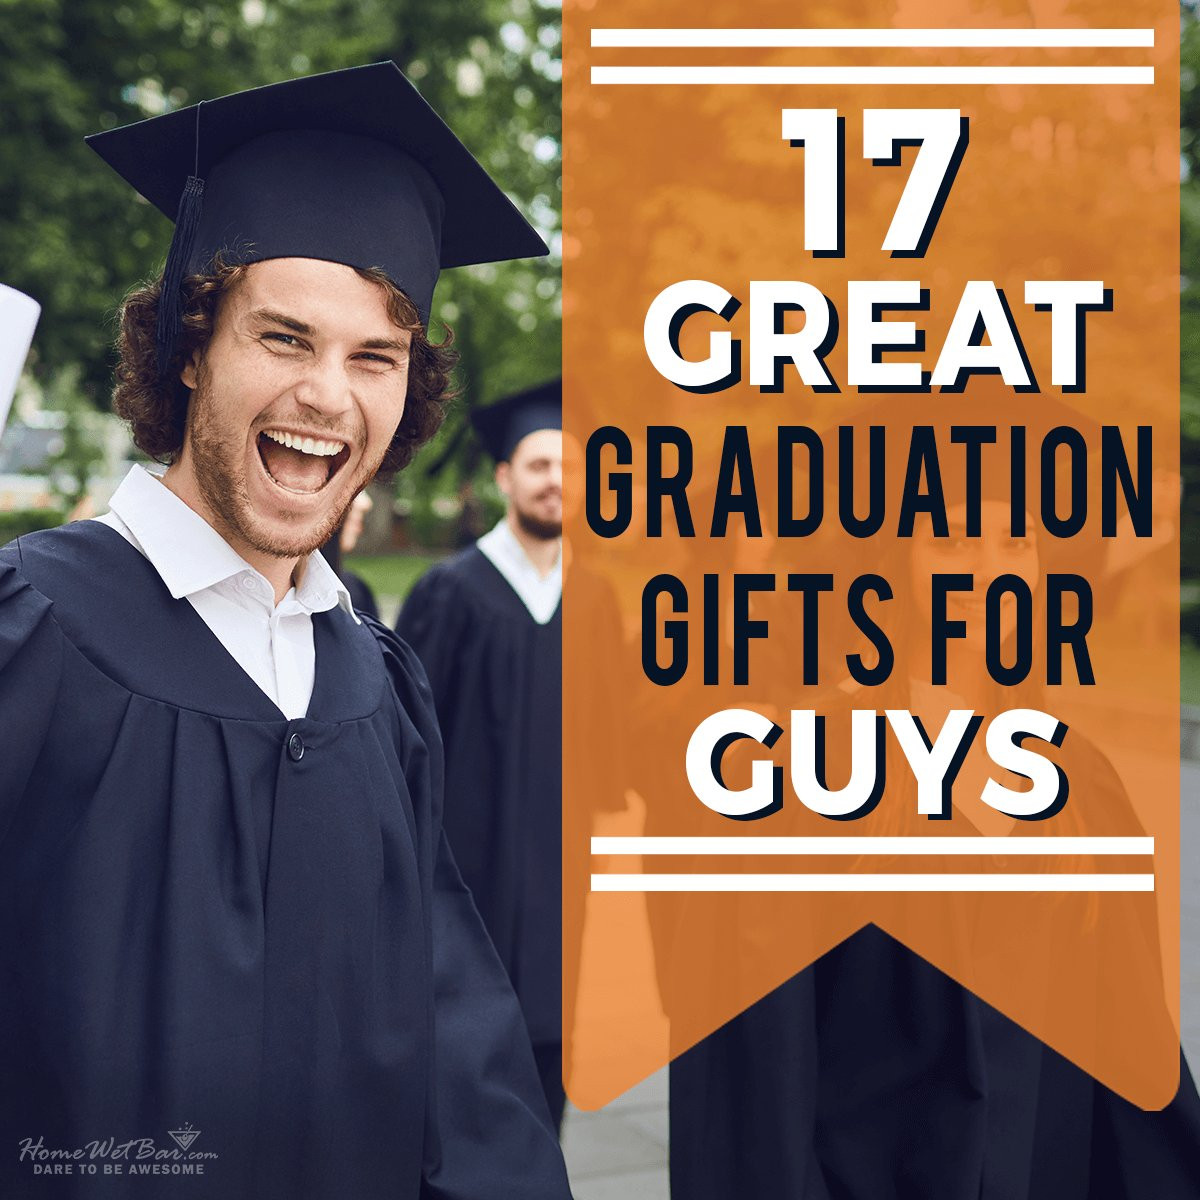 Masters Graduation Gift Ideas For Him
 17 Great Graduation Gifts for Guys